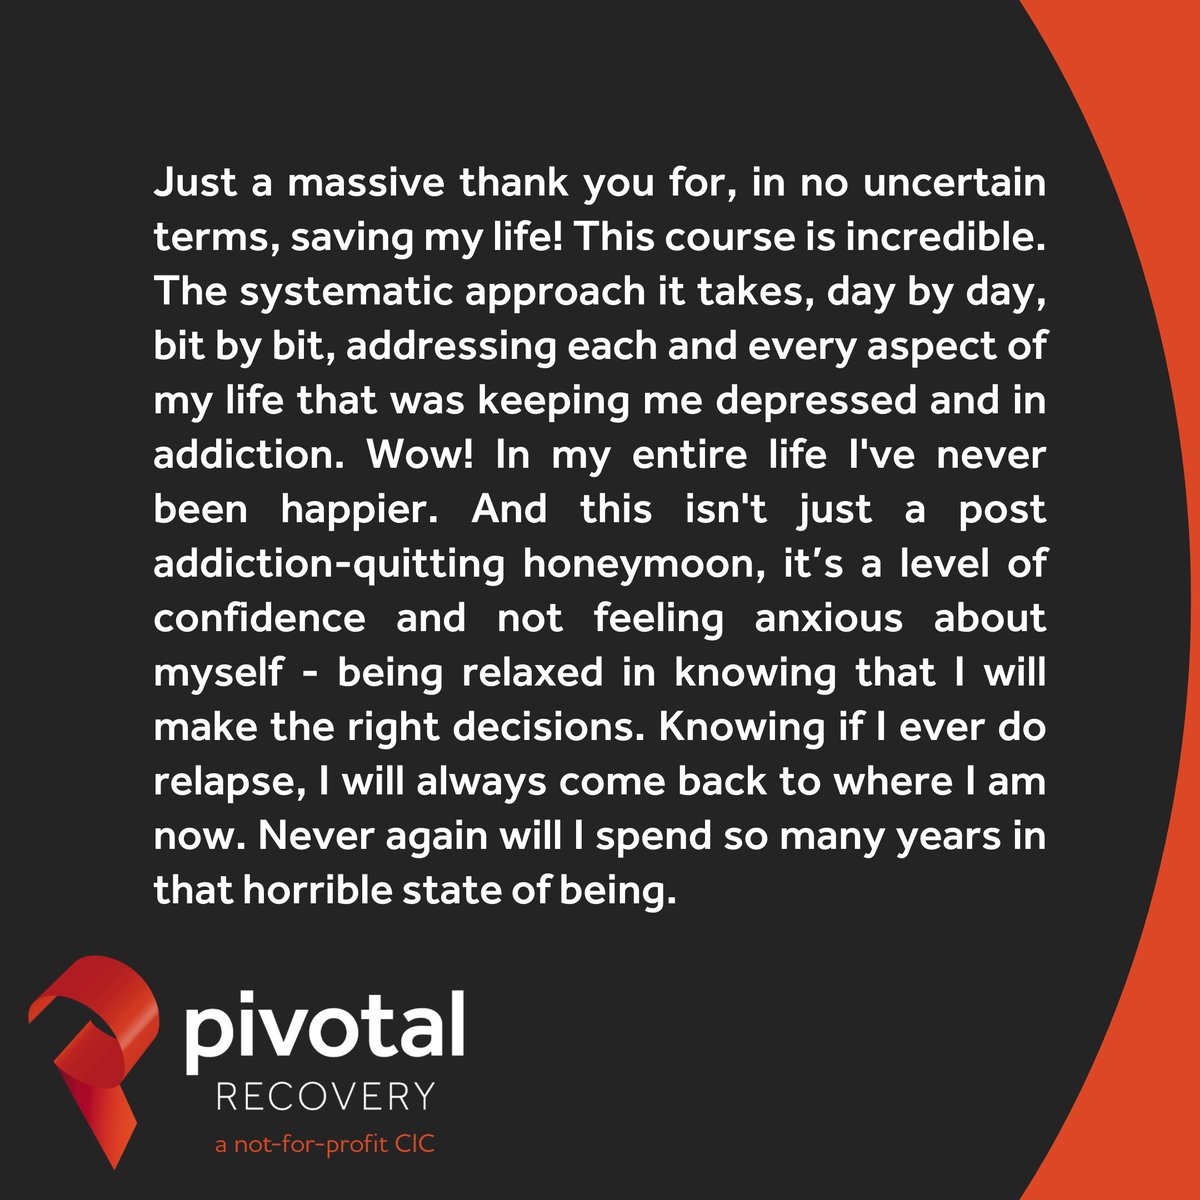 It's feedback like this that reminds me how powerful this work is. Feeling so encouraged by this and hope Pivotal Recovery can help many more people in this way. #pornaddiction #sexaddiction #recovery